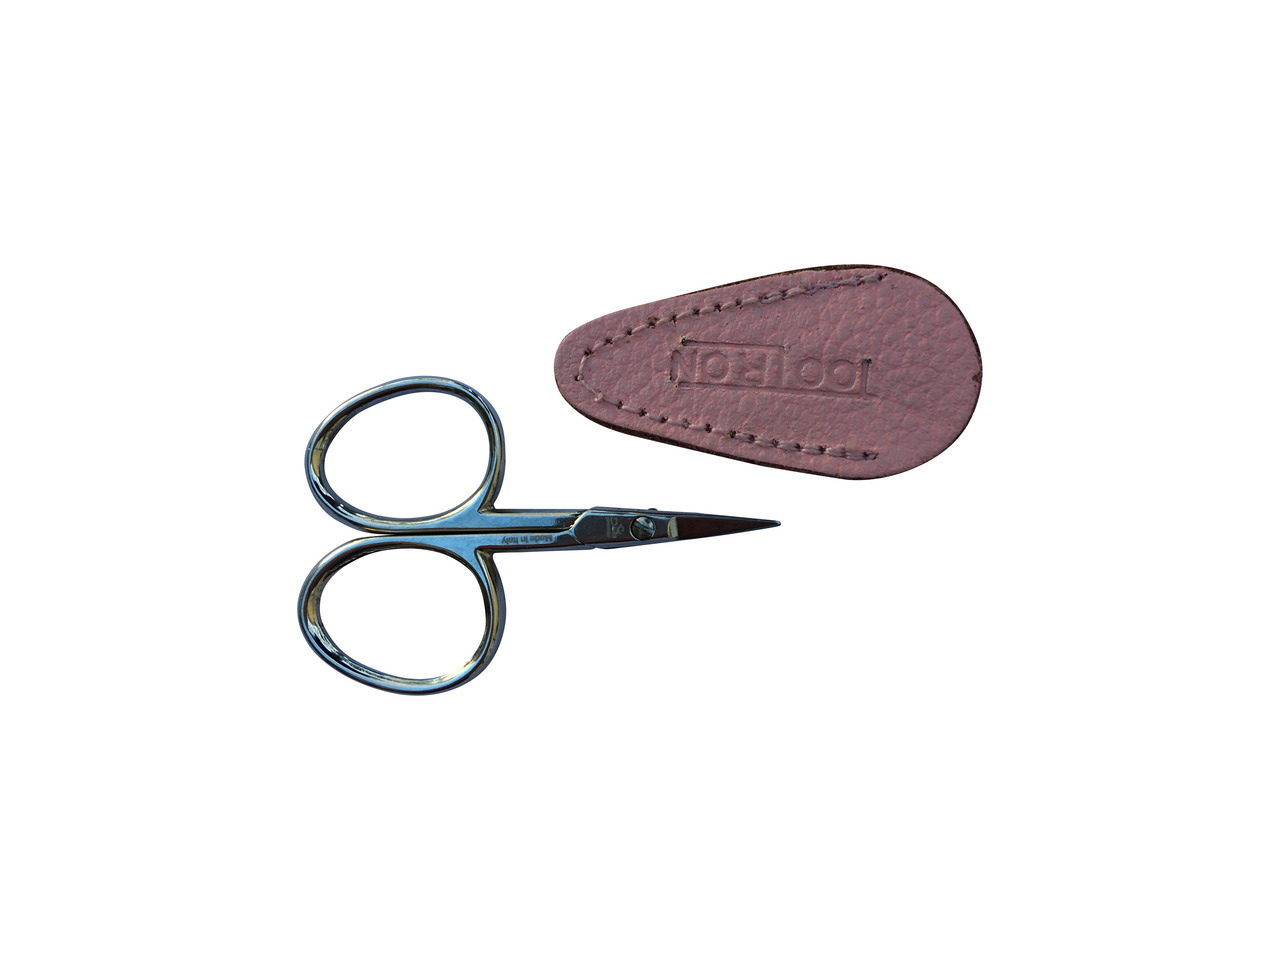 Worlds Smallest Working Scissors Sheath Included 2.5 inches